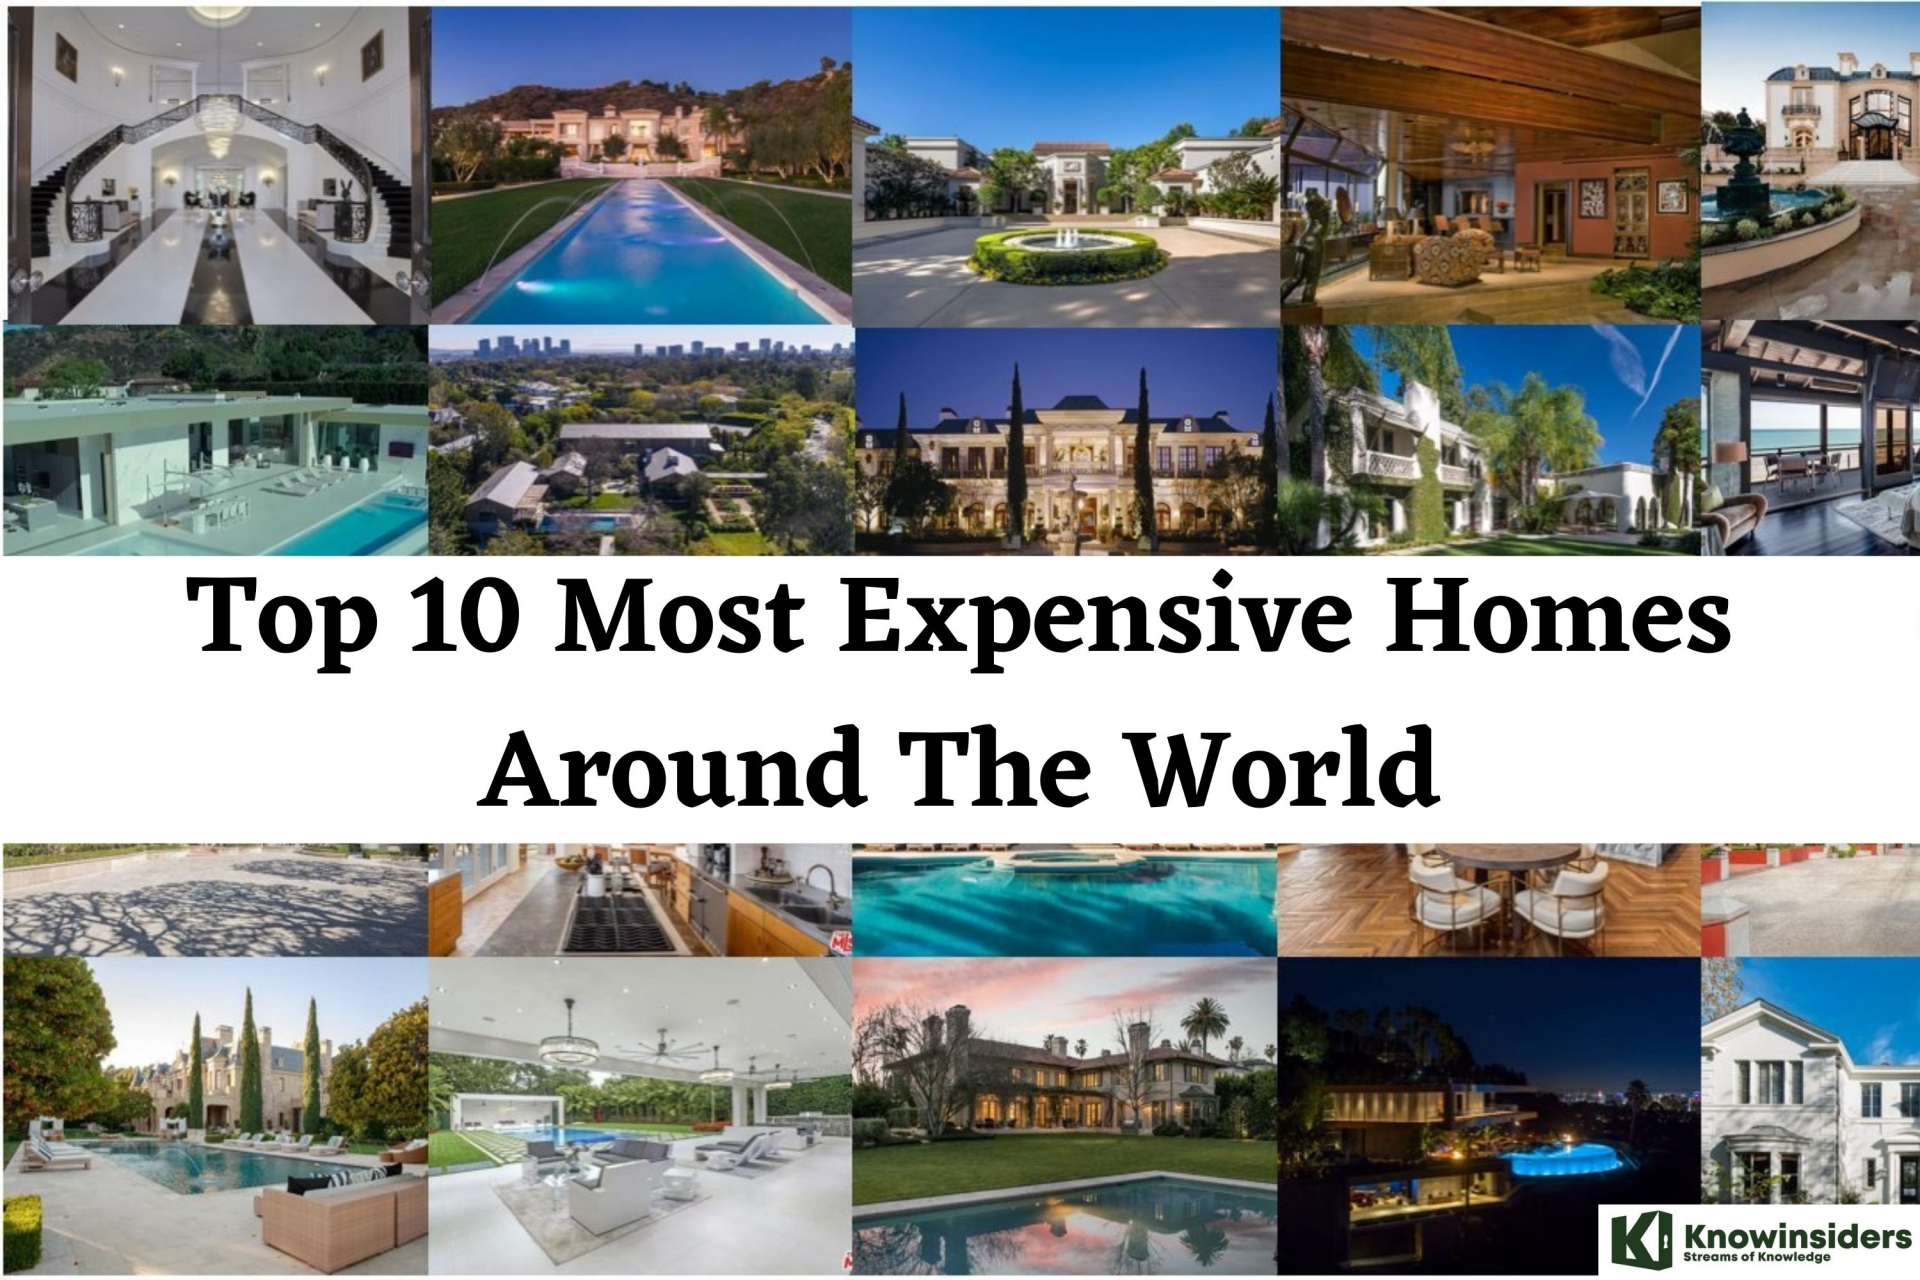 Photo: Top 10 Most Expensive Homes In The World